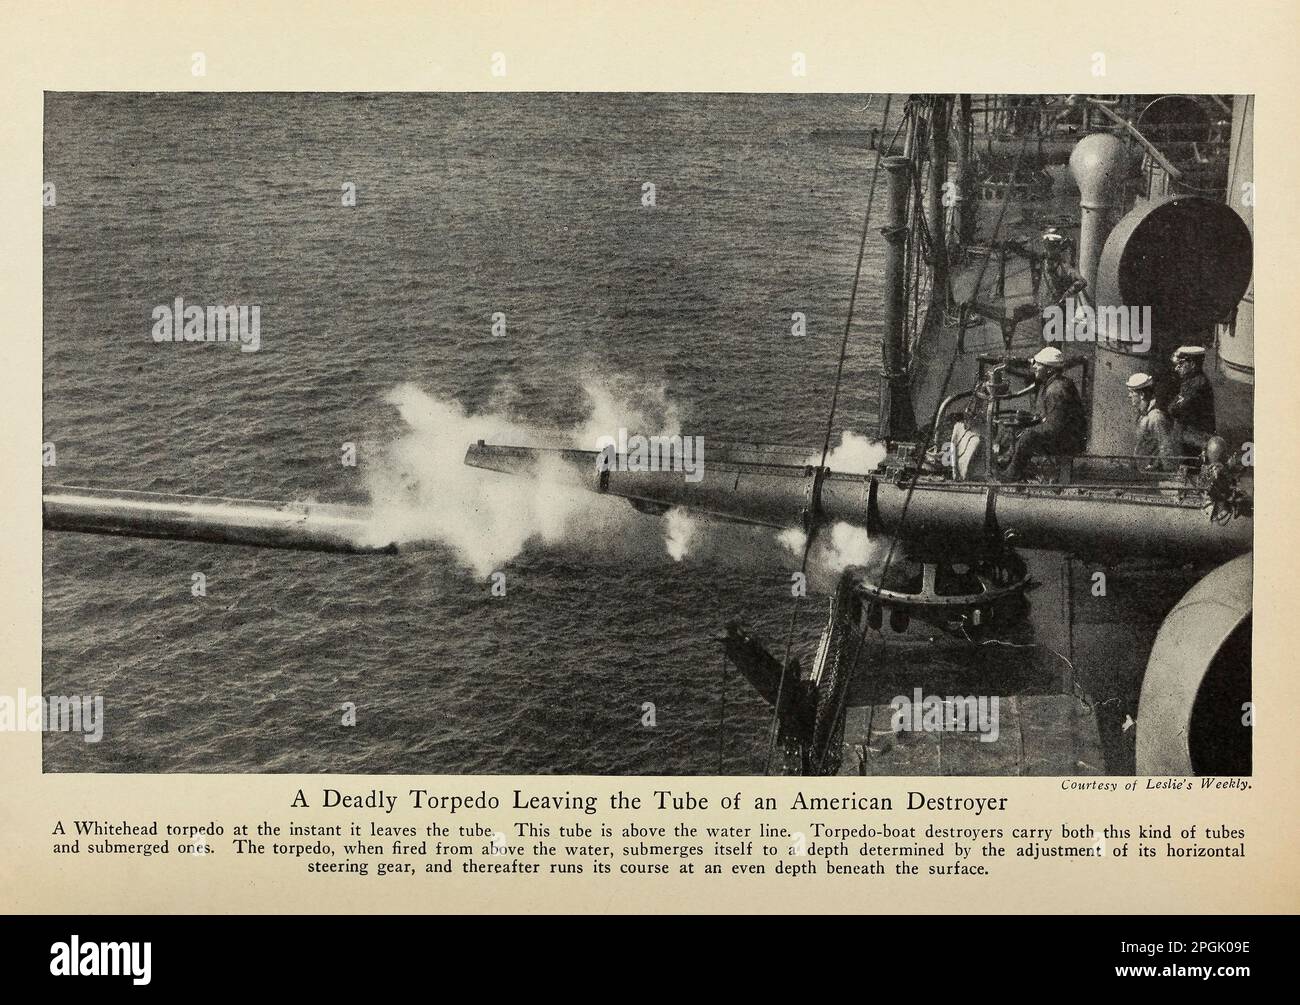 A Deadly Torpedo Leading the Tube of an American Destroyer from the book ' Deeds of Heroism and Tapvery : the book of Heroes and Personal Daring ' von Elwyn Alfred Barron und Rupert Hughes, Publication Date 1920 Publisher New York : Harper & Brothers Publishers Stockfoto